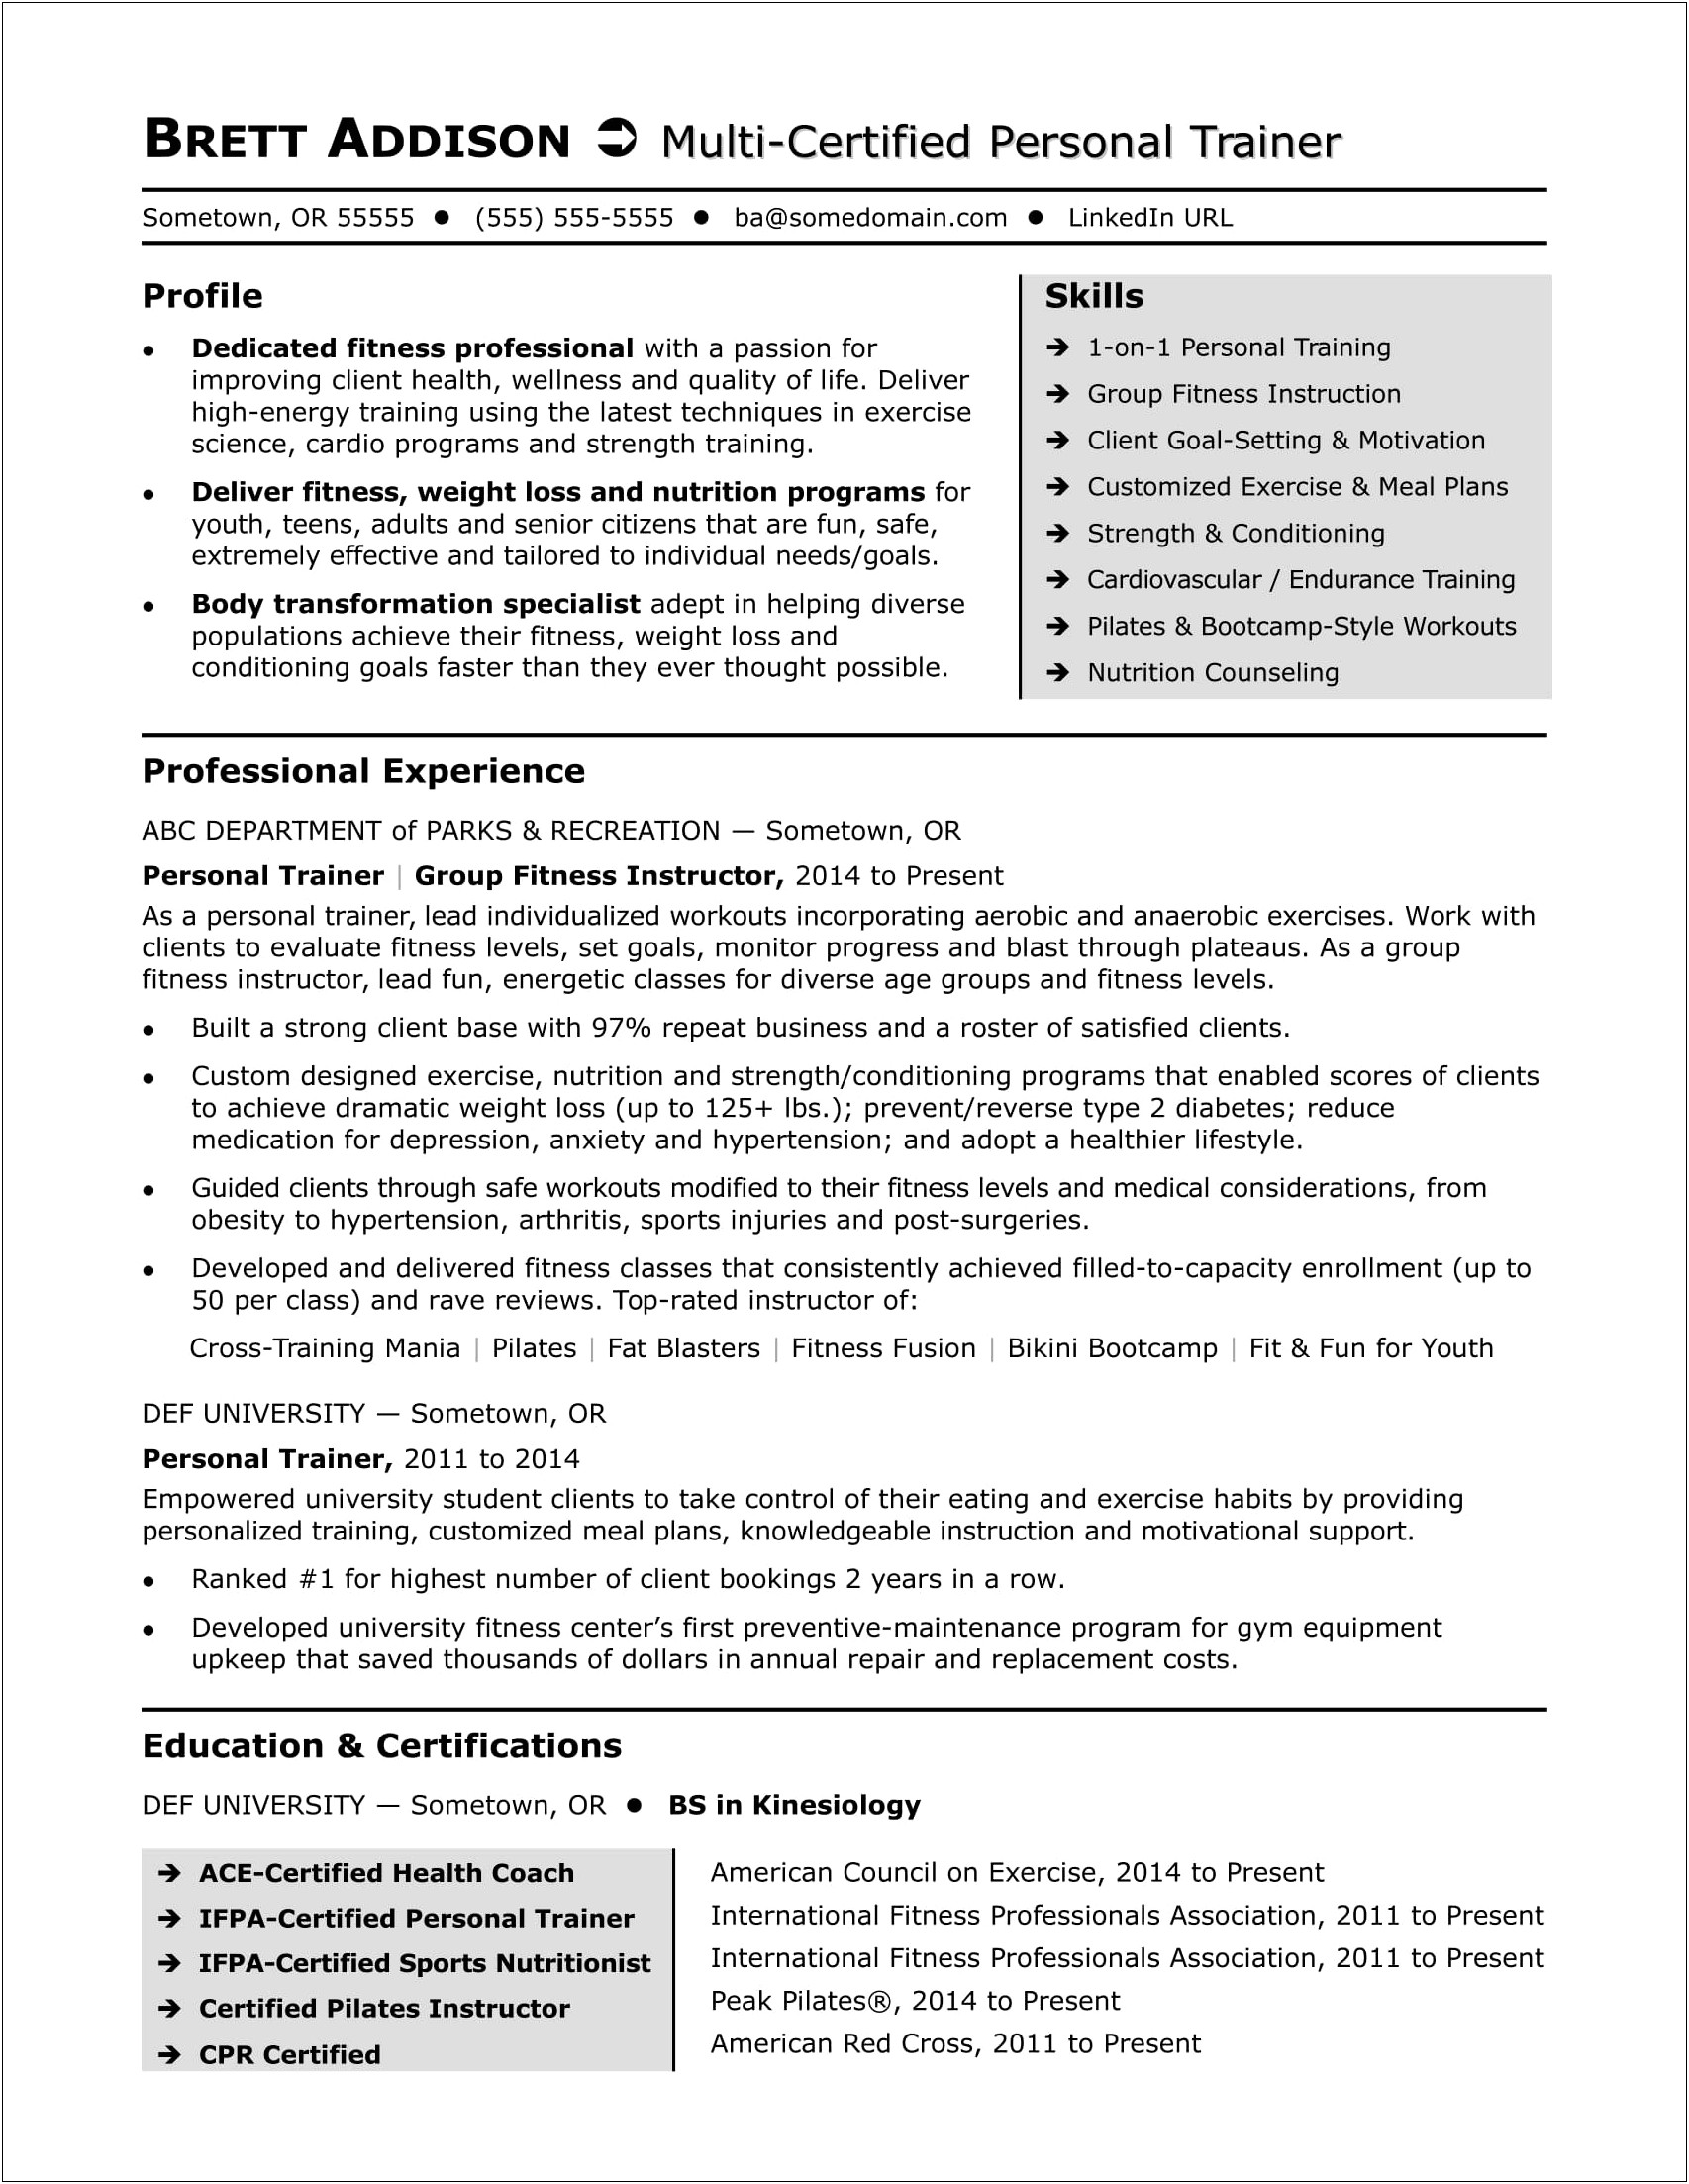 Sample Resume With Professional Associations